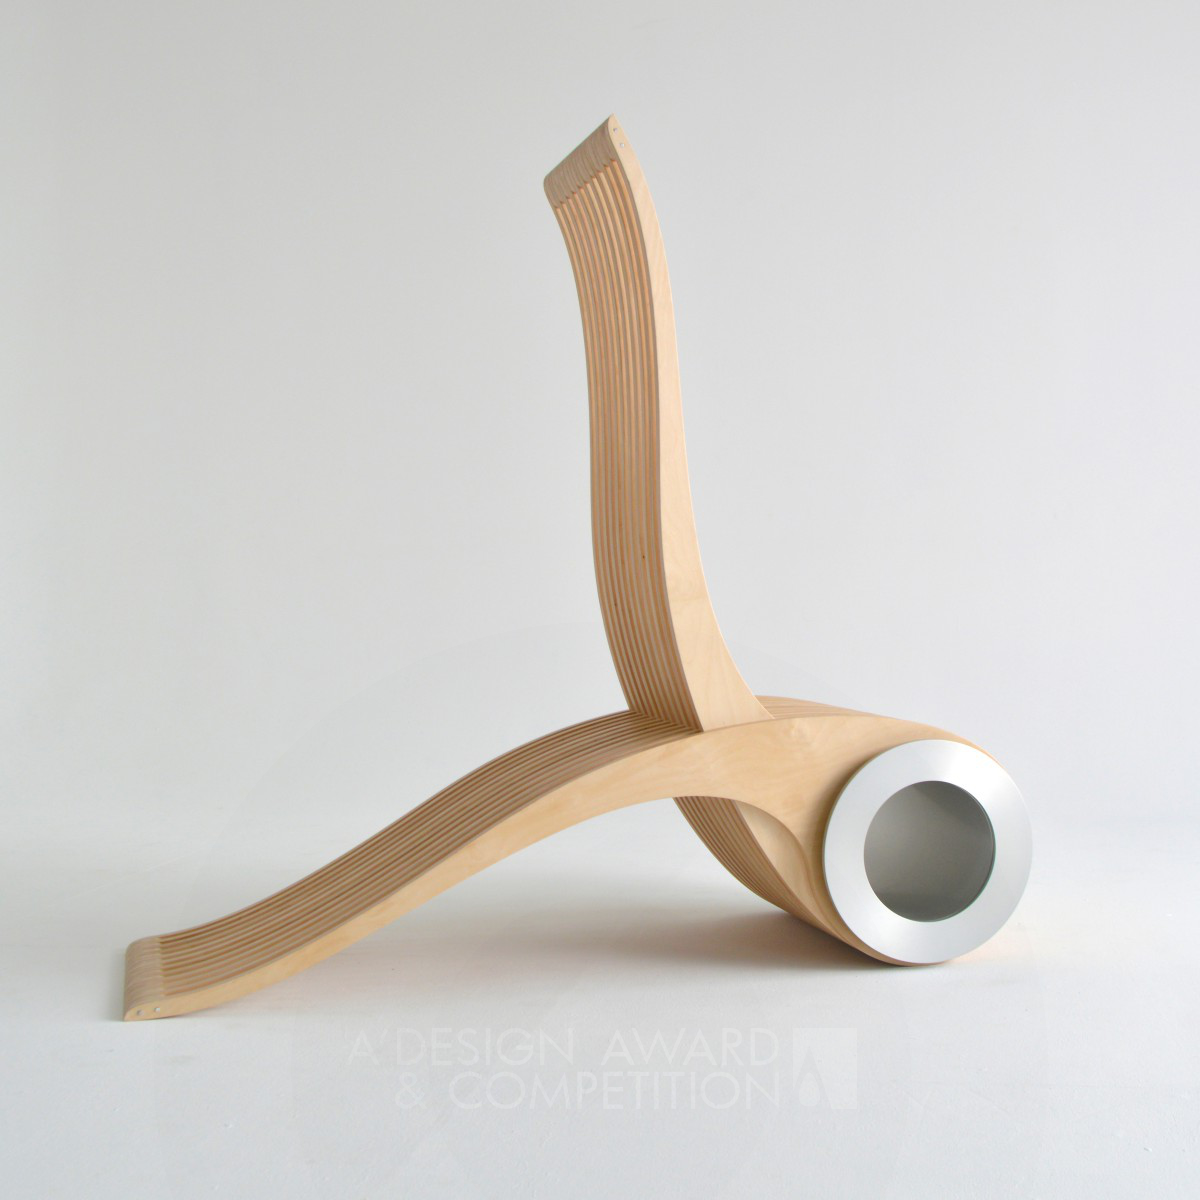 Exocet Multifunctional Chair by Stéphane Leathead